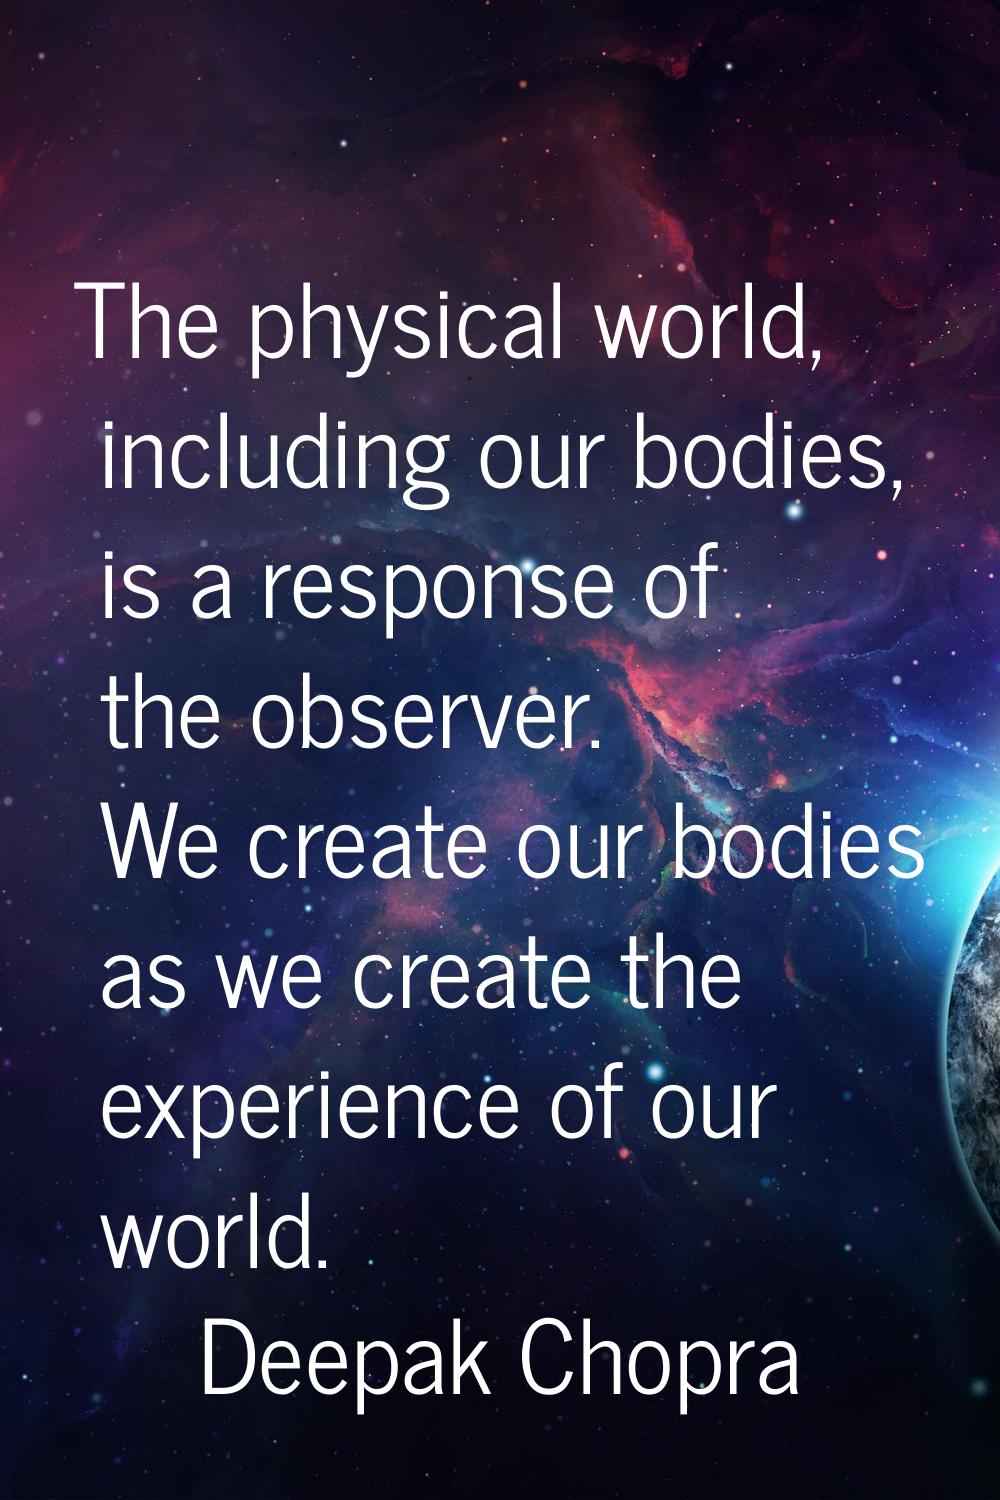 The physical world, including our bodies, is a response of the observer. We create our bodies as we